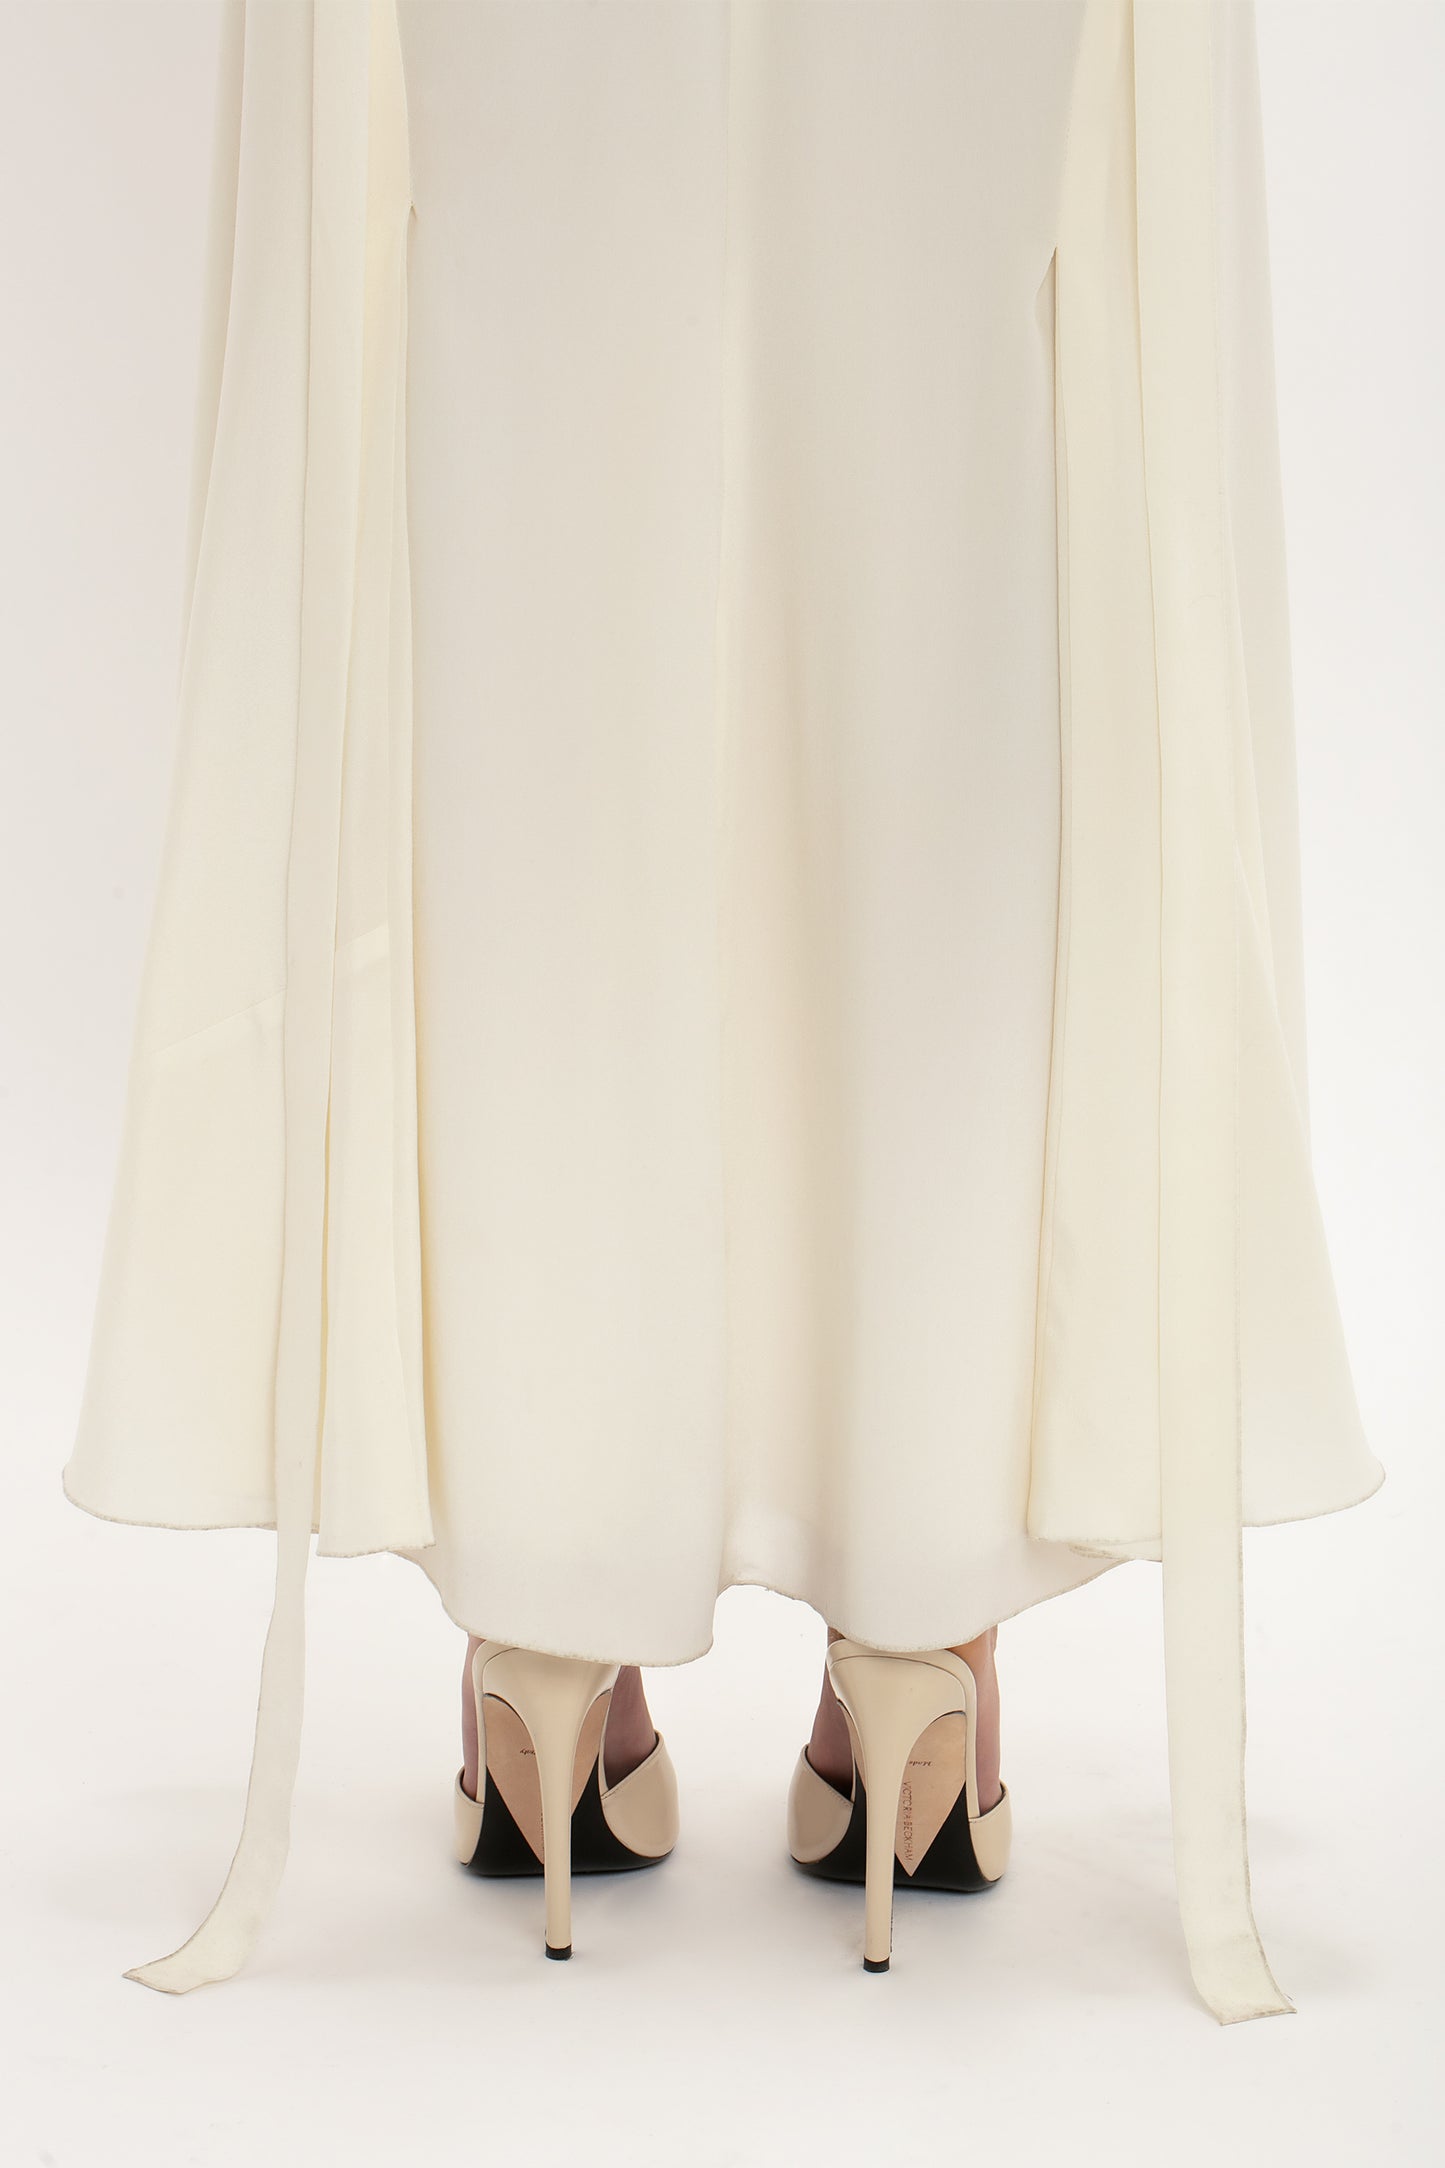 A person wearing an elegant white Ruffle Detail Midi Dress In Ivory by Victoria Beckham and beige high heels stands on a white background. Two long fabric strips hang from the sleeves of the dress.